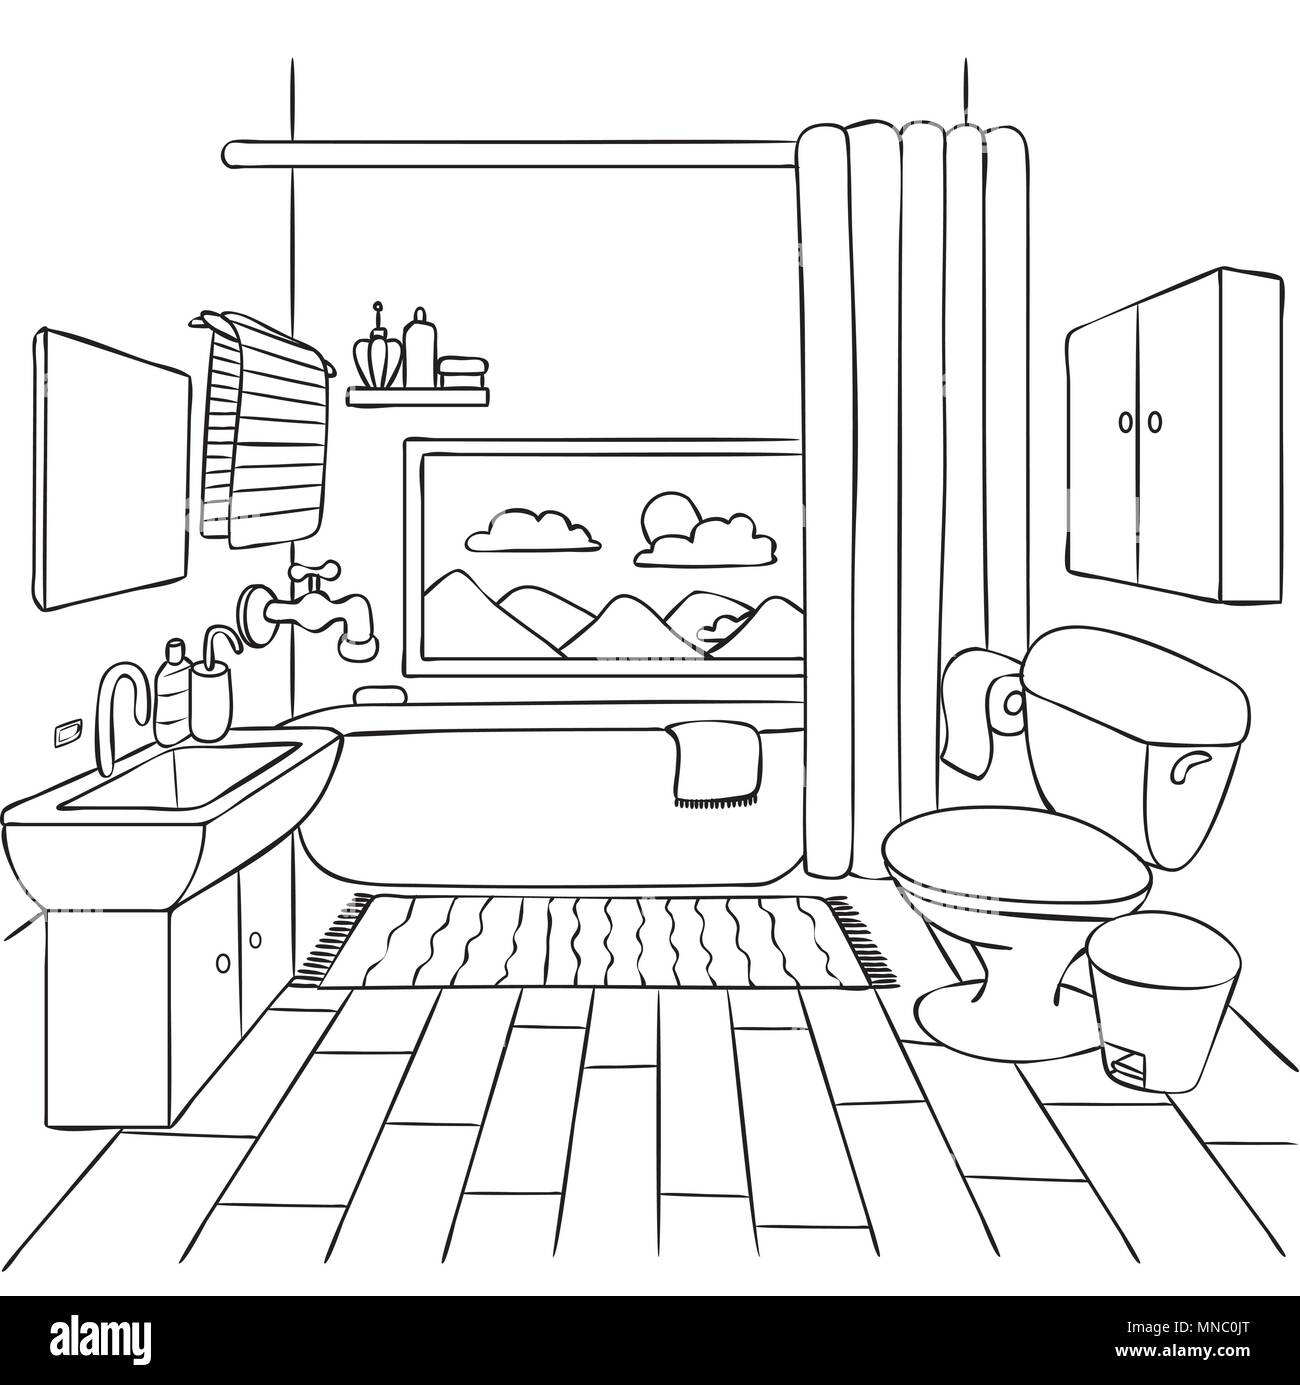 Adult Coloring Pages Bathroom Coloring Pages 